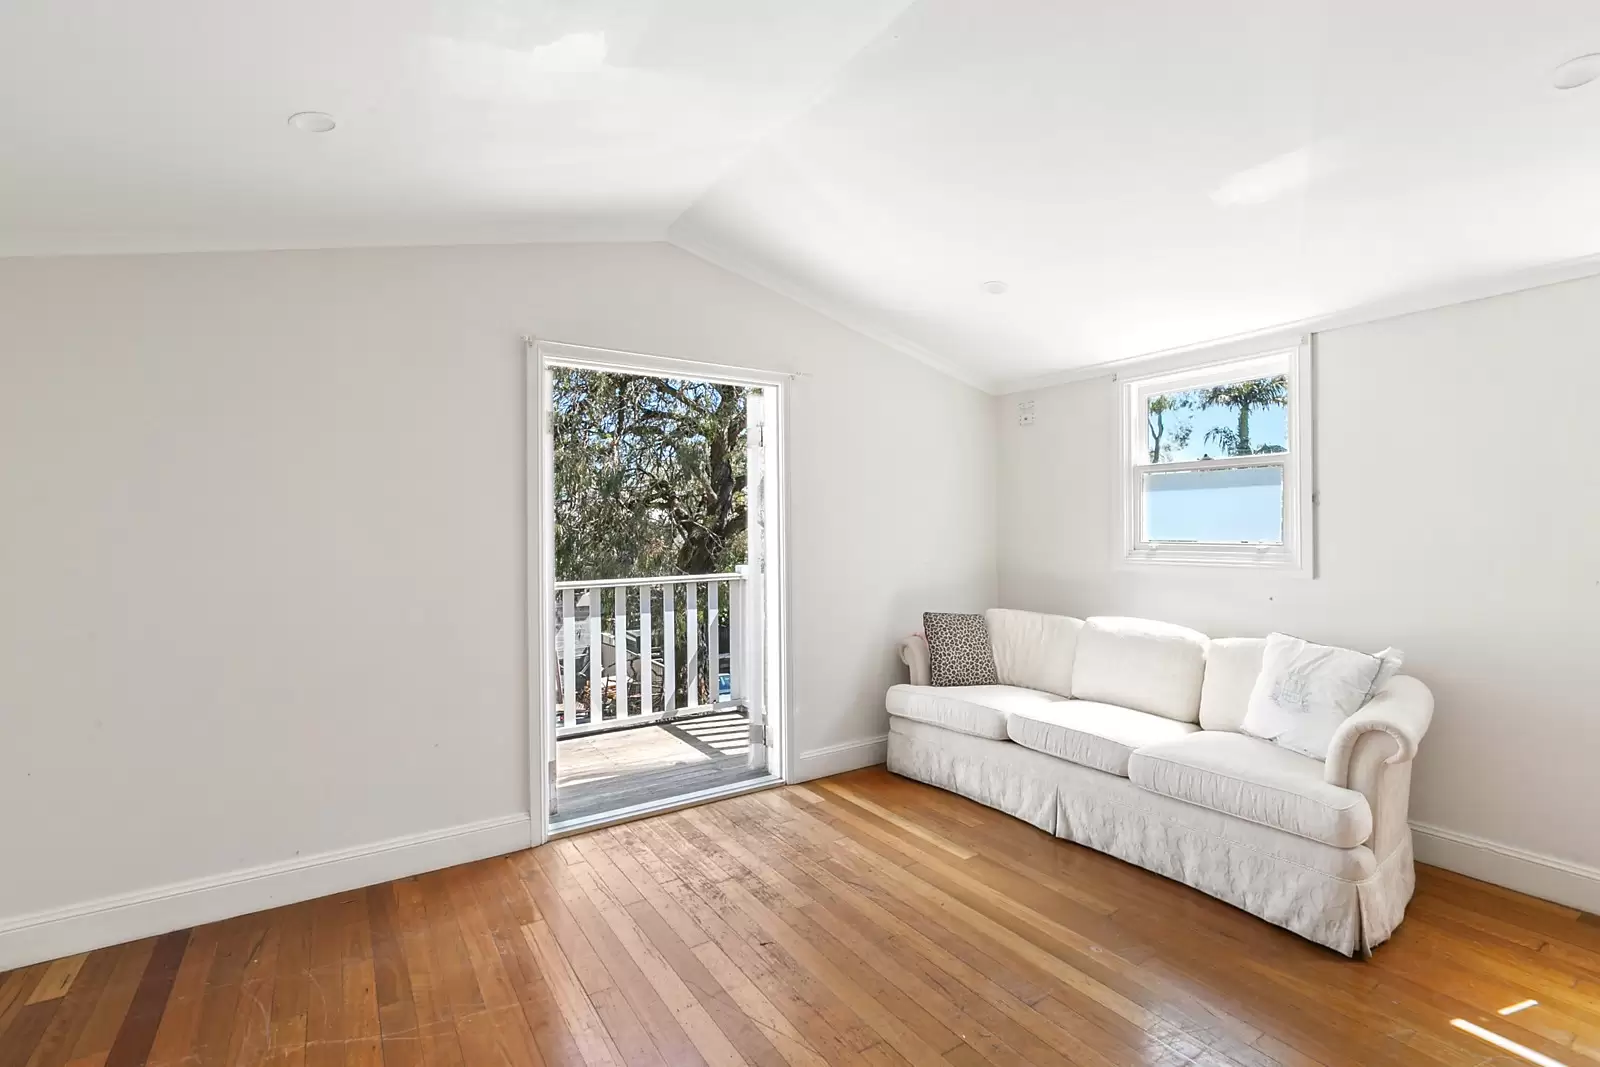 Photo #9: 24 Junction Street, Woollahra - Sold by Sydney Sotheby's International Realty